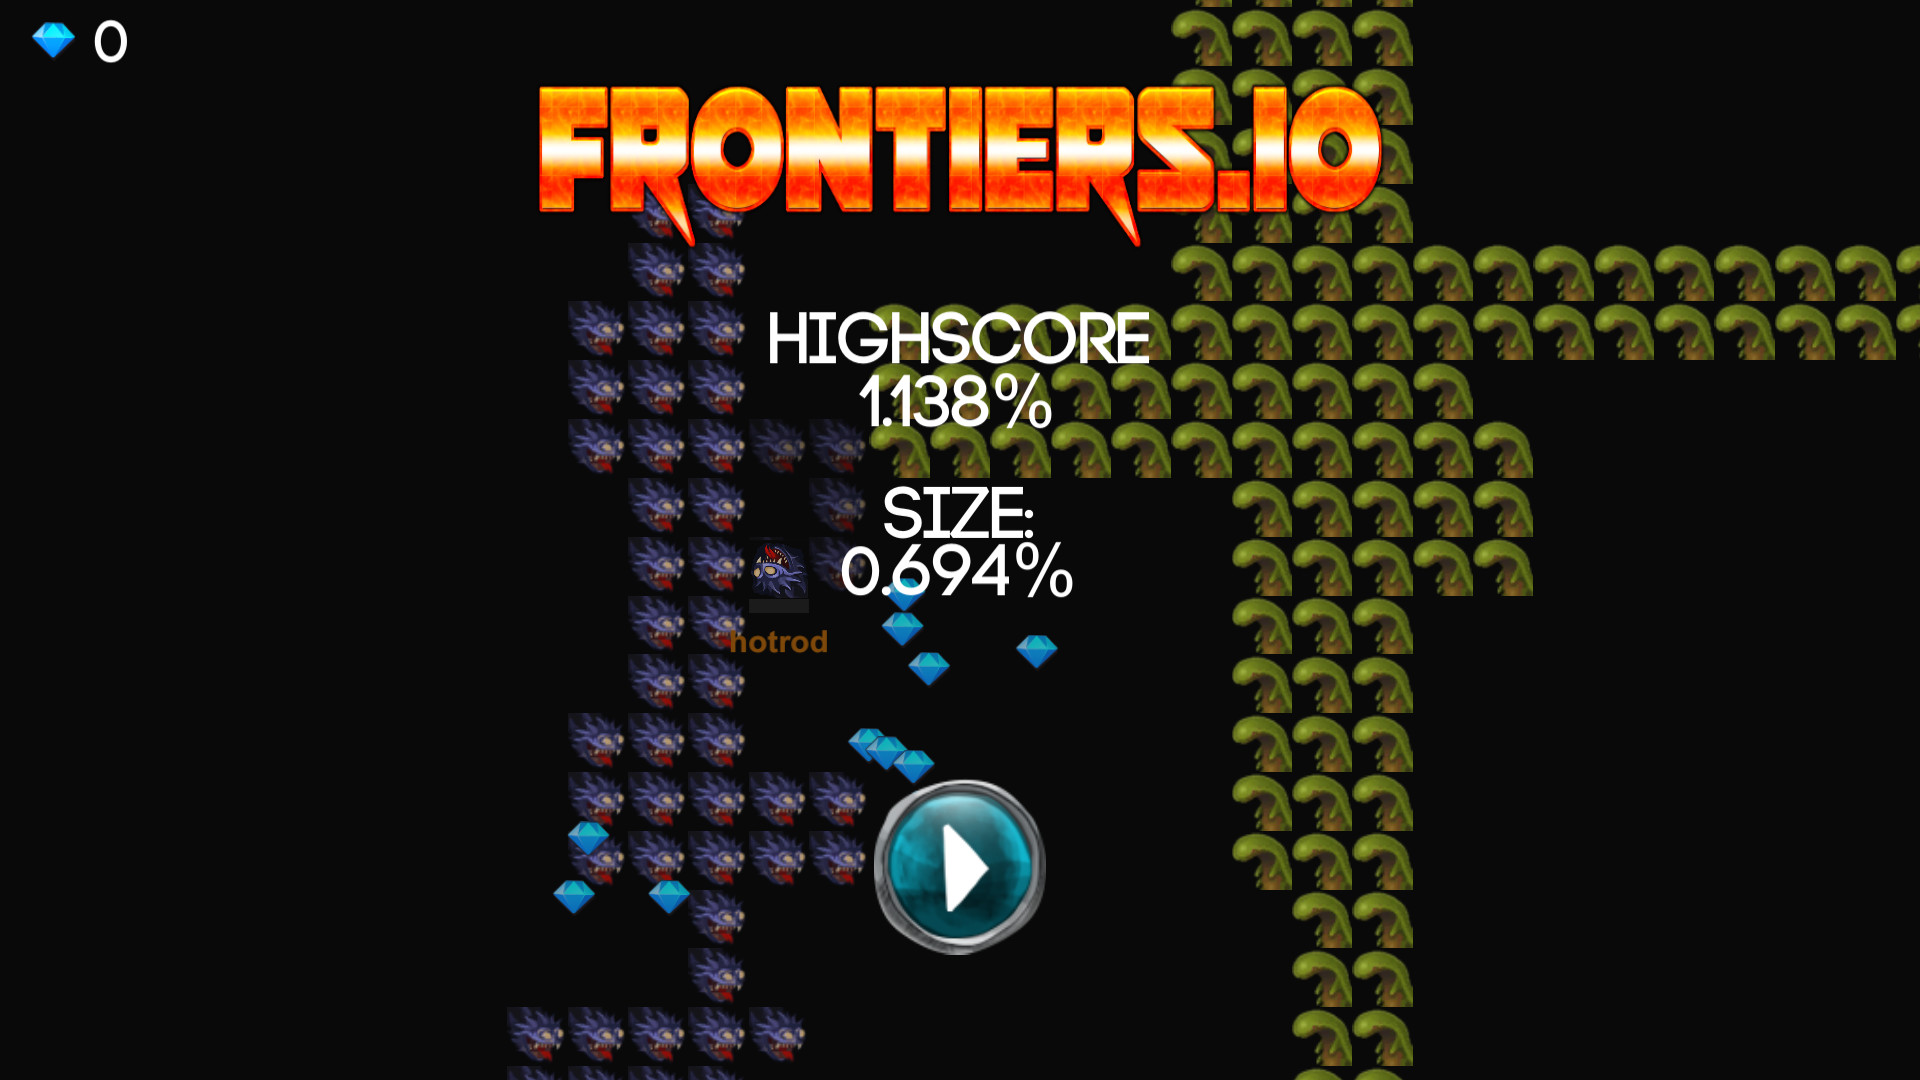 Frontiers.io - Expansion Pack 5 screenshot